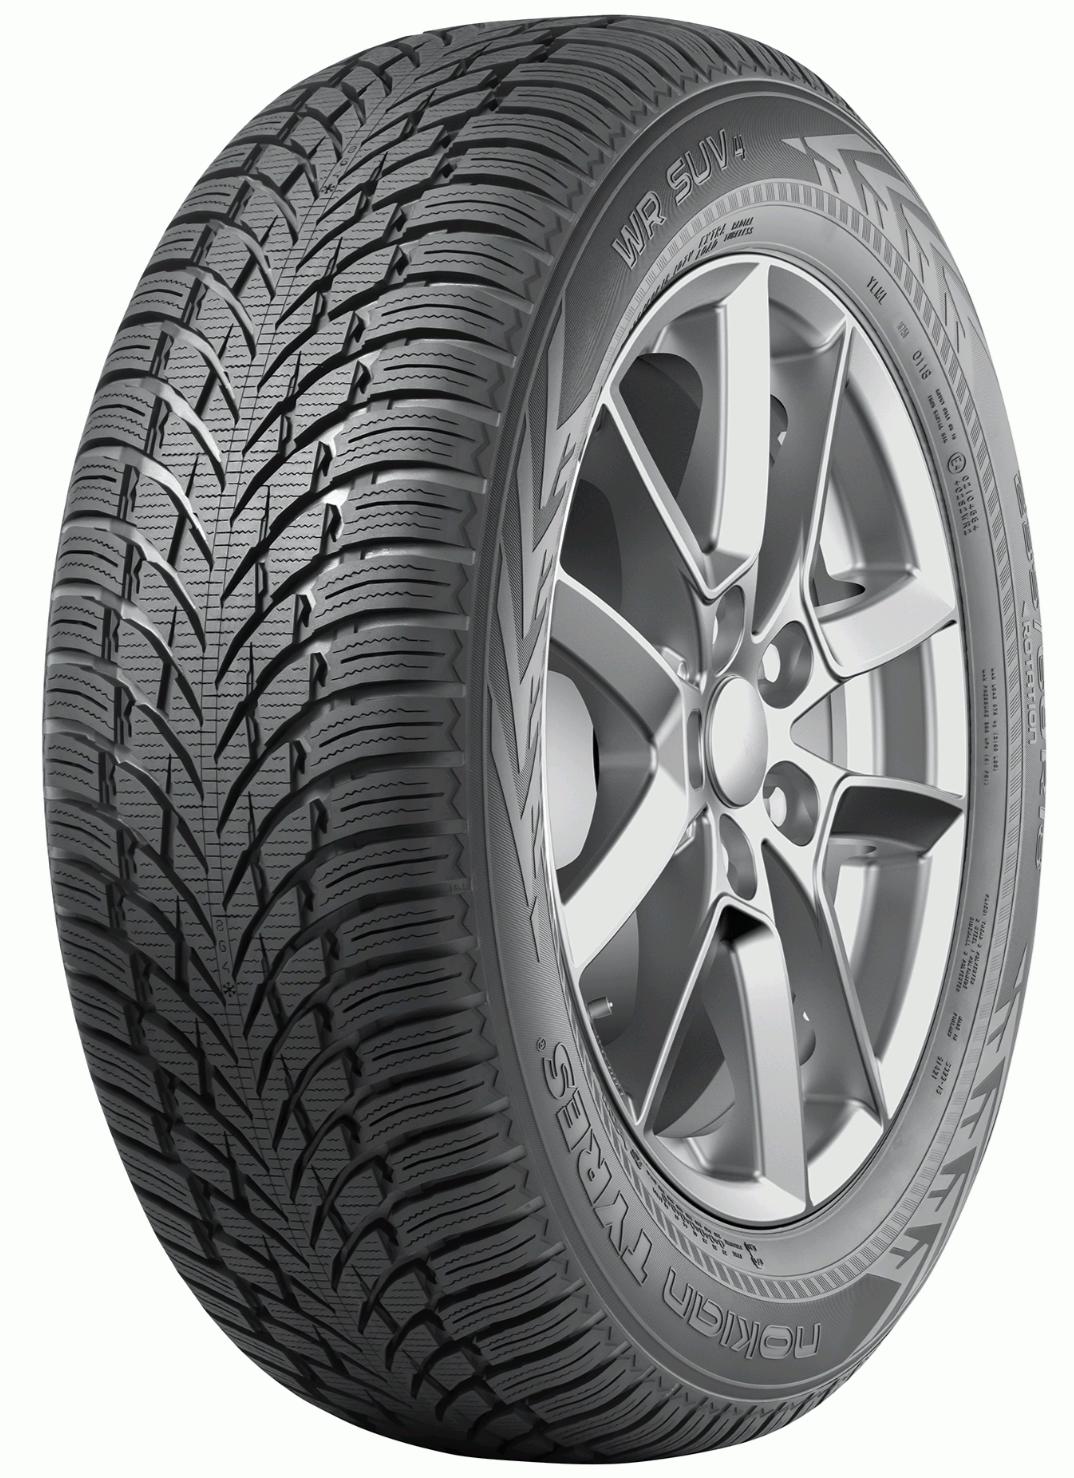 Nokian WR SUV 4 - Tire Reviews and Tests